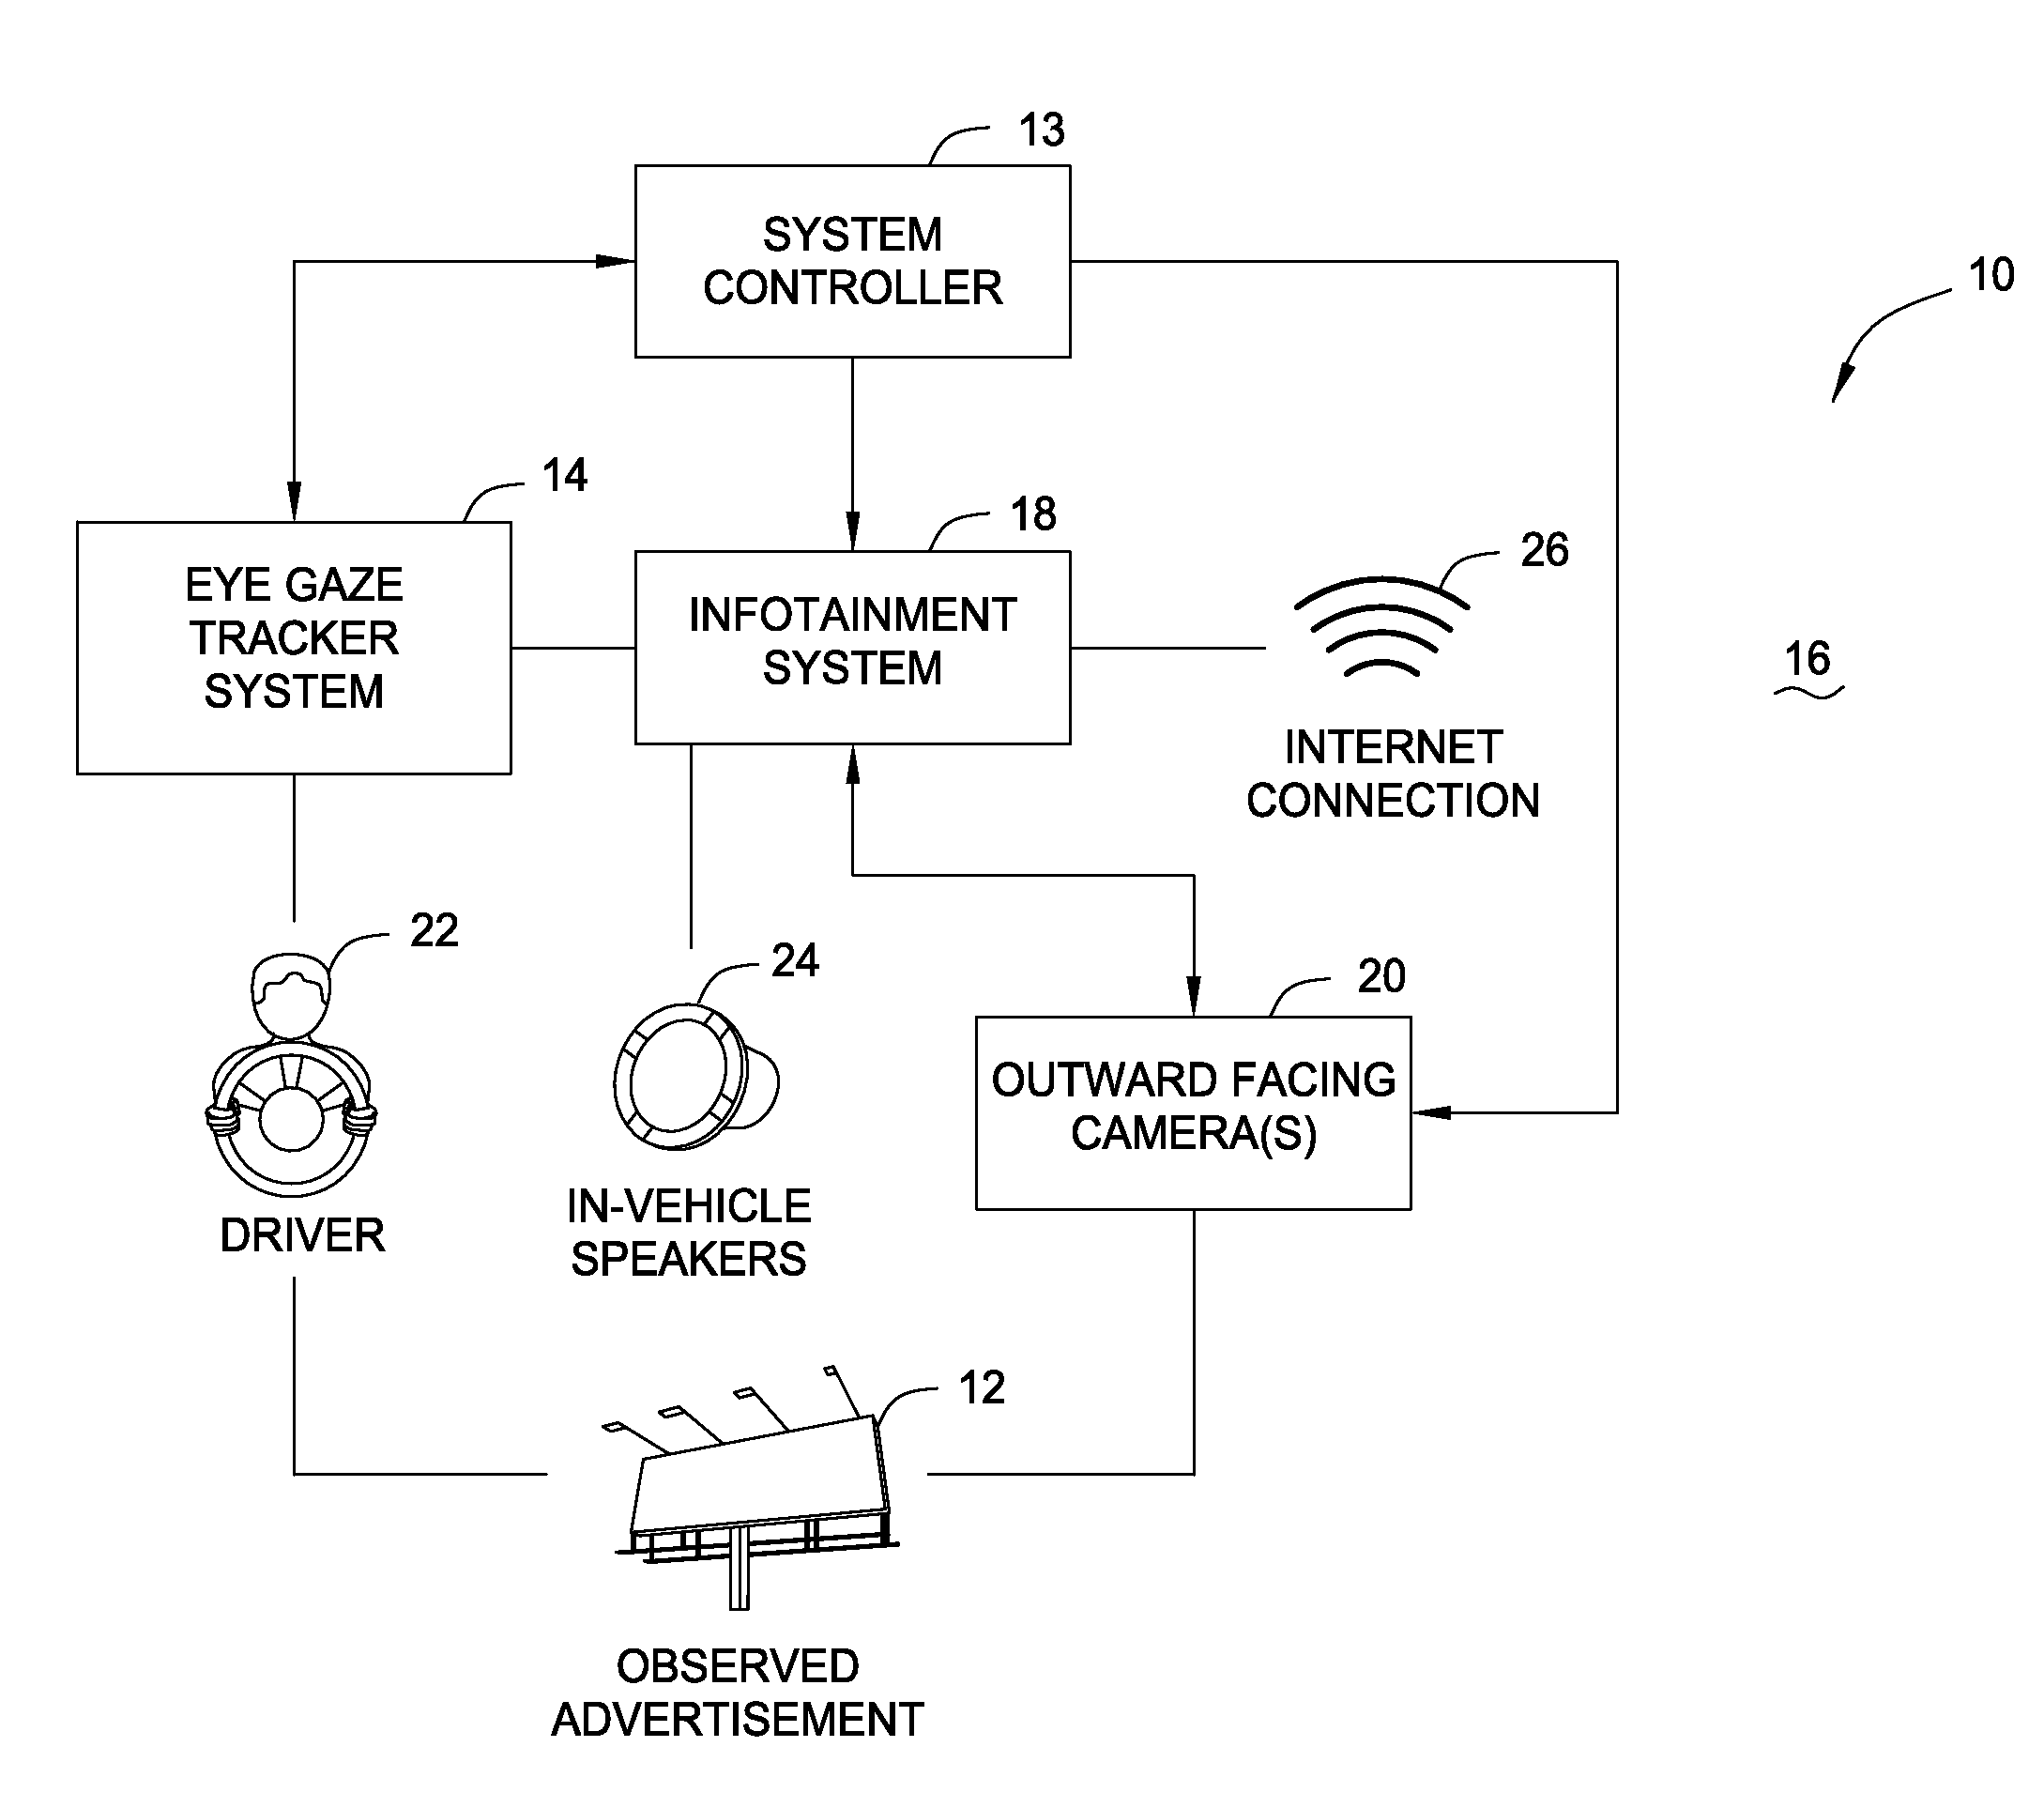 Apparatus and method for detecting a driver's interest in an advertisement by tracking driver eye gaze